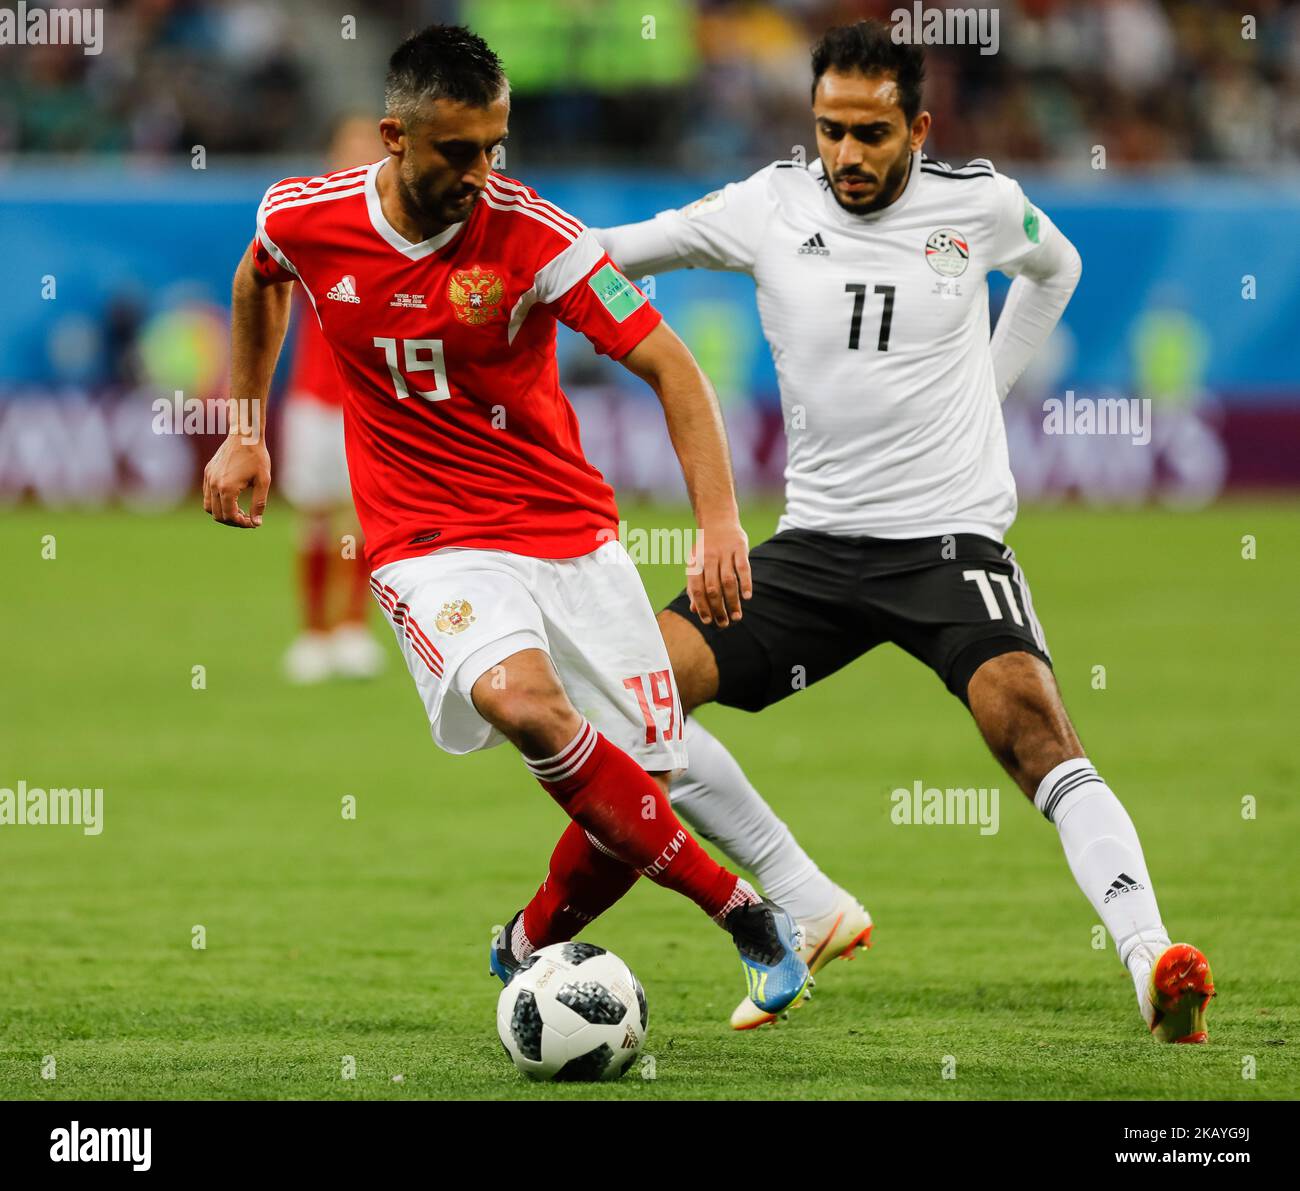 Alexander Samedov (L) of Russia national team and Kahraba of Egypt national team vie for the ball during the 2018 FIFA World Cup Russia group A match between Russia and Egypt on June 19, 2018 at Saint Petersburg Stadium in Saint Petersburg, Russia. (Photo by Mike Kireev/NurPhoto) Stock Photo